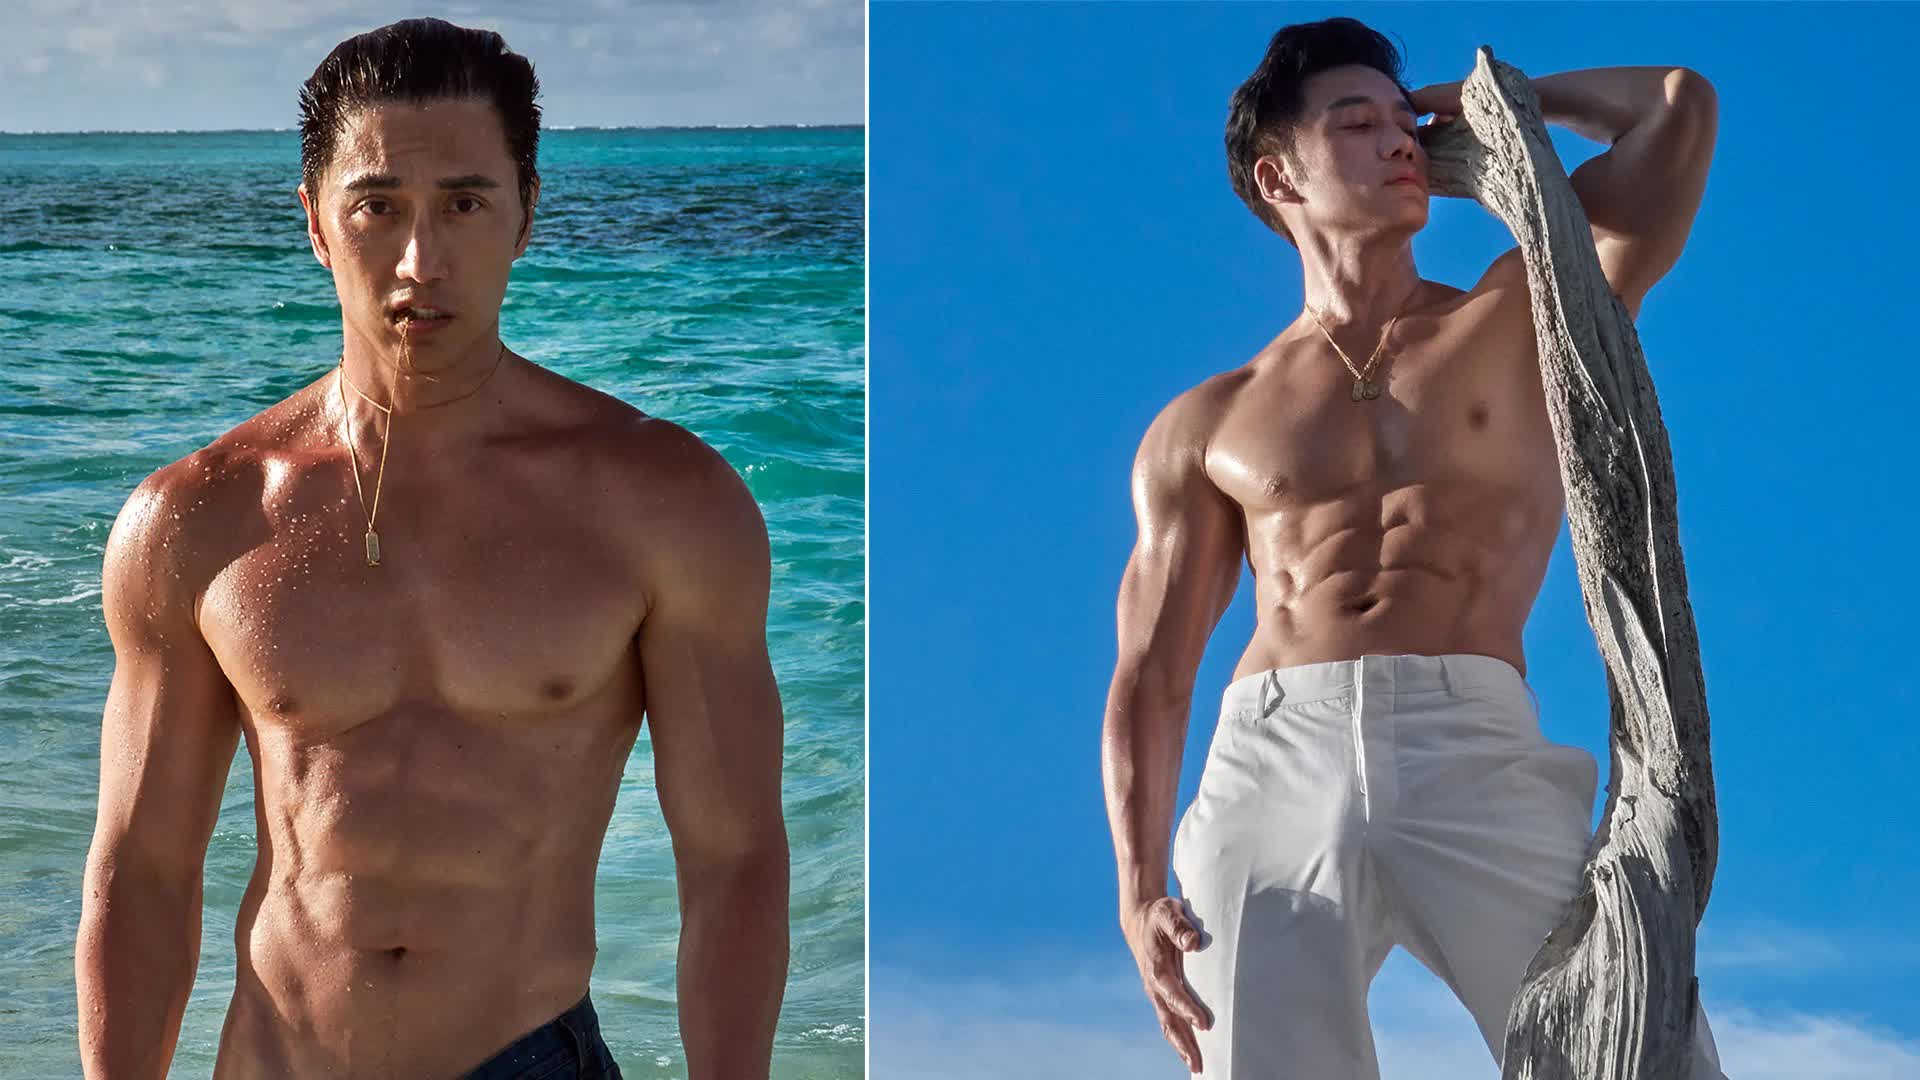 viral-thirst-trap-chuando-tan-57-launches-photo-book-with-tips-on-how-to-look-like-him